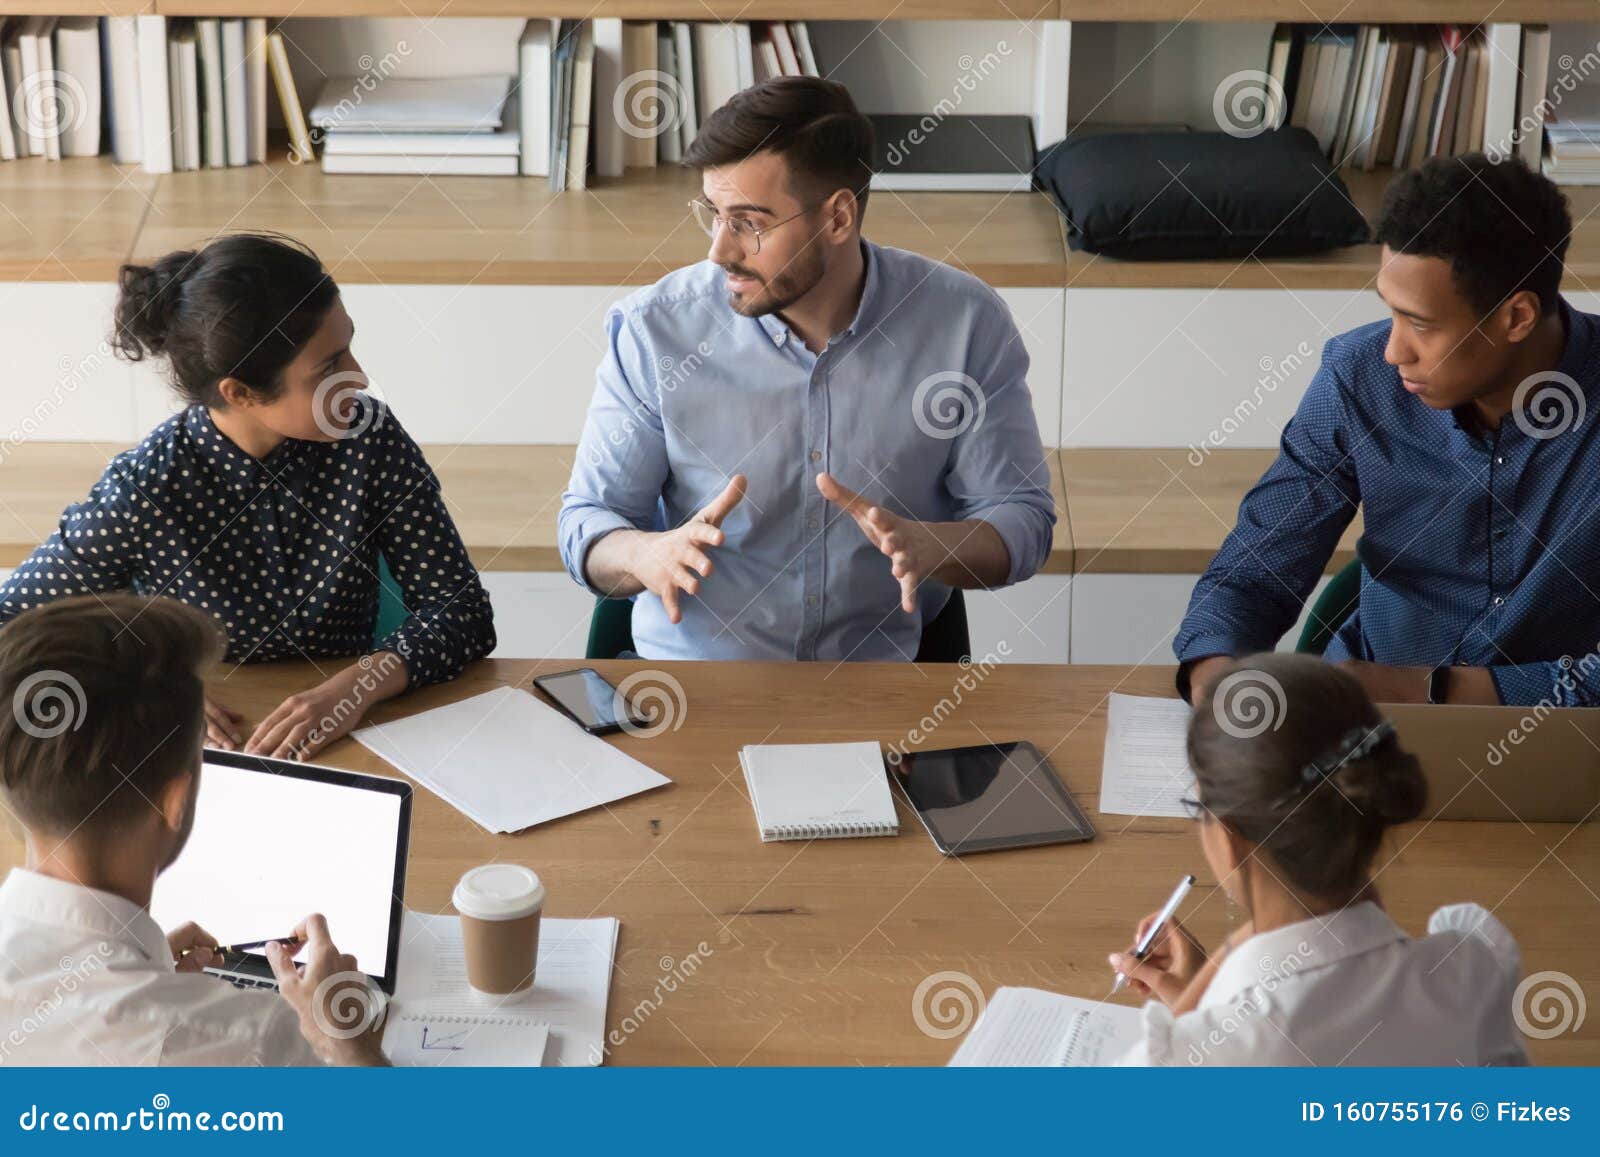 skilled male manager talking to diverse business people at meeting